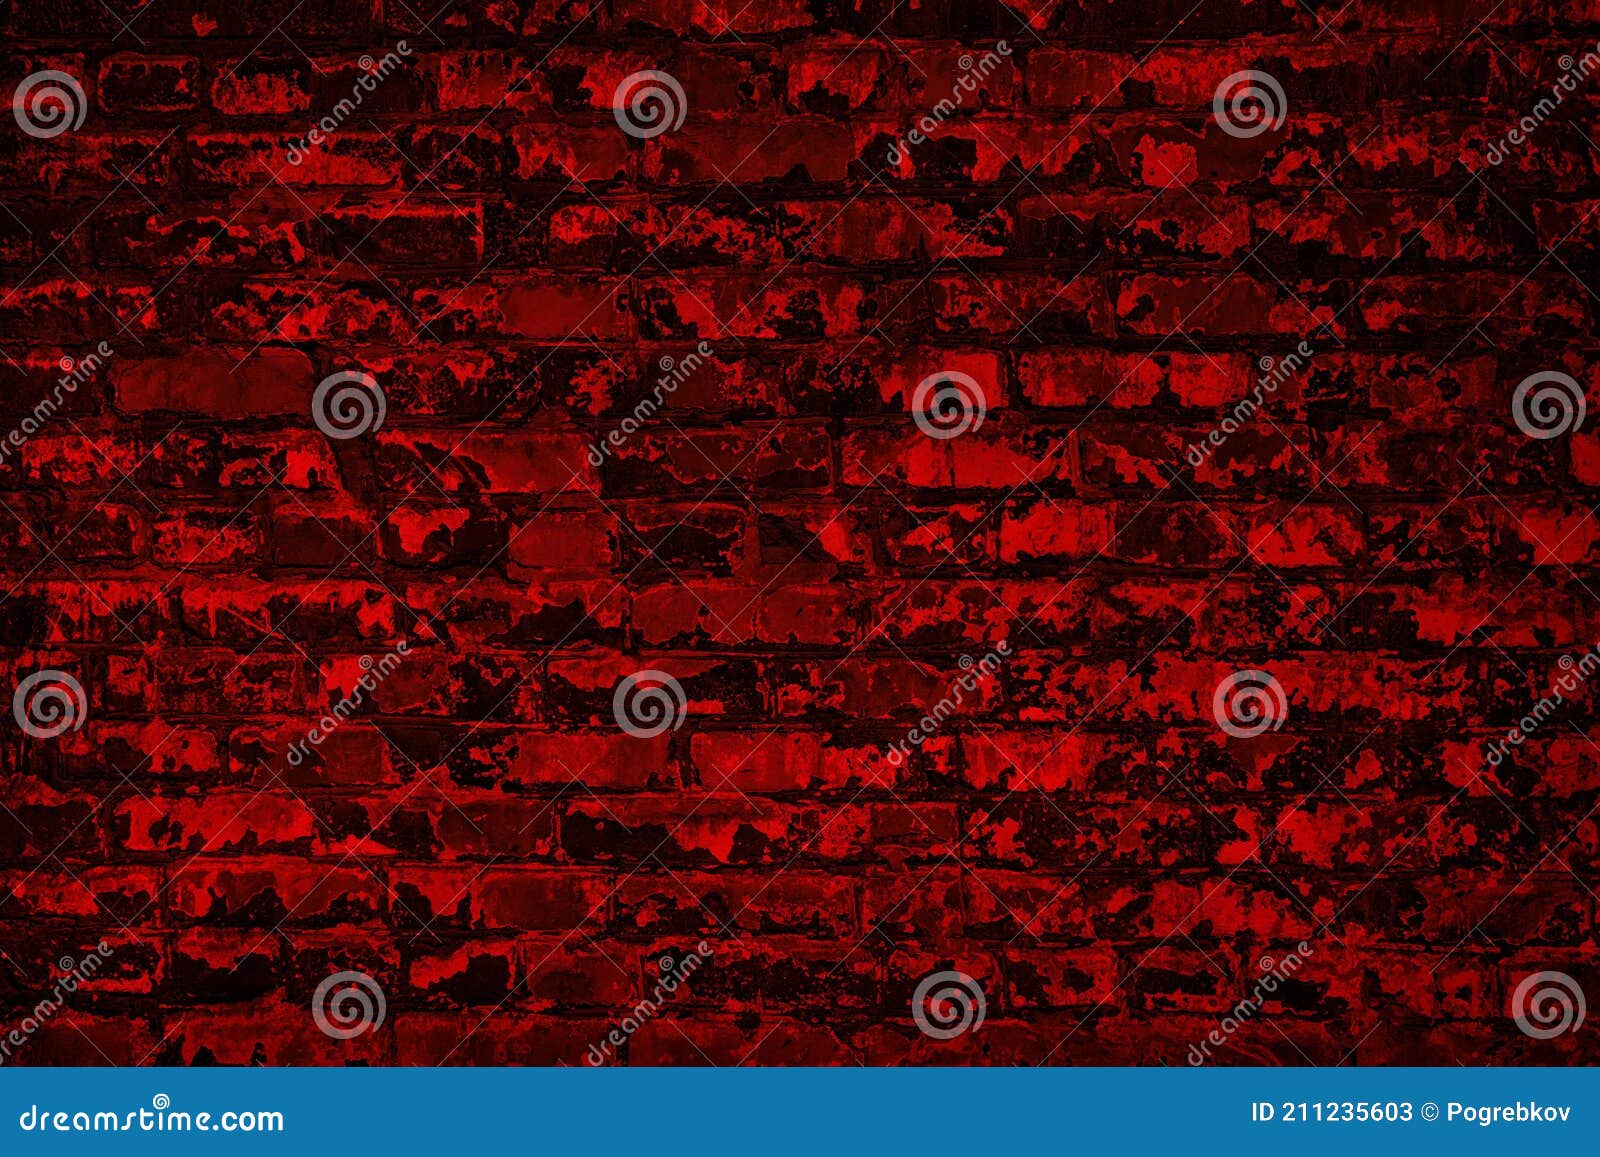 Old shabby scarlet colour painted brick wall. Aged bright red brickwork texture. Dark grunge background